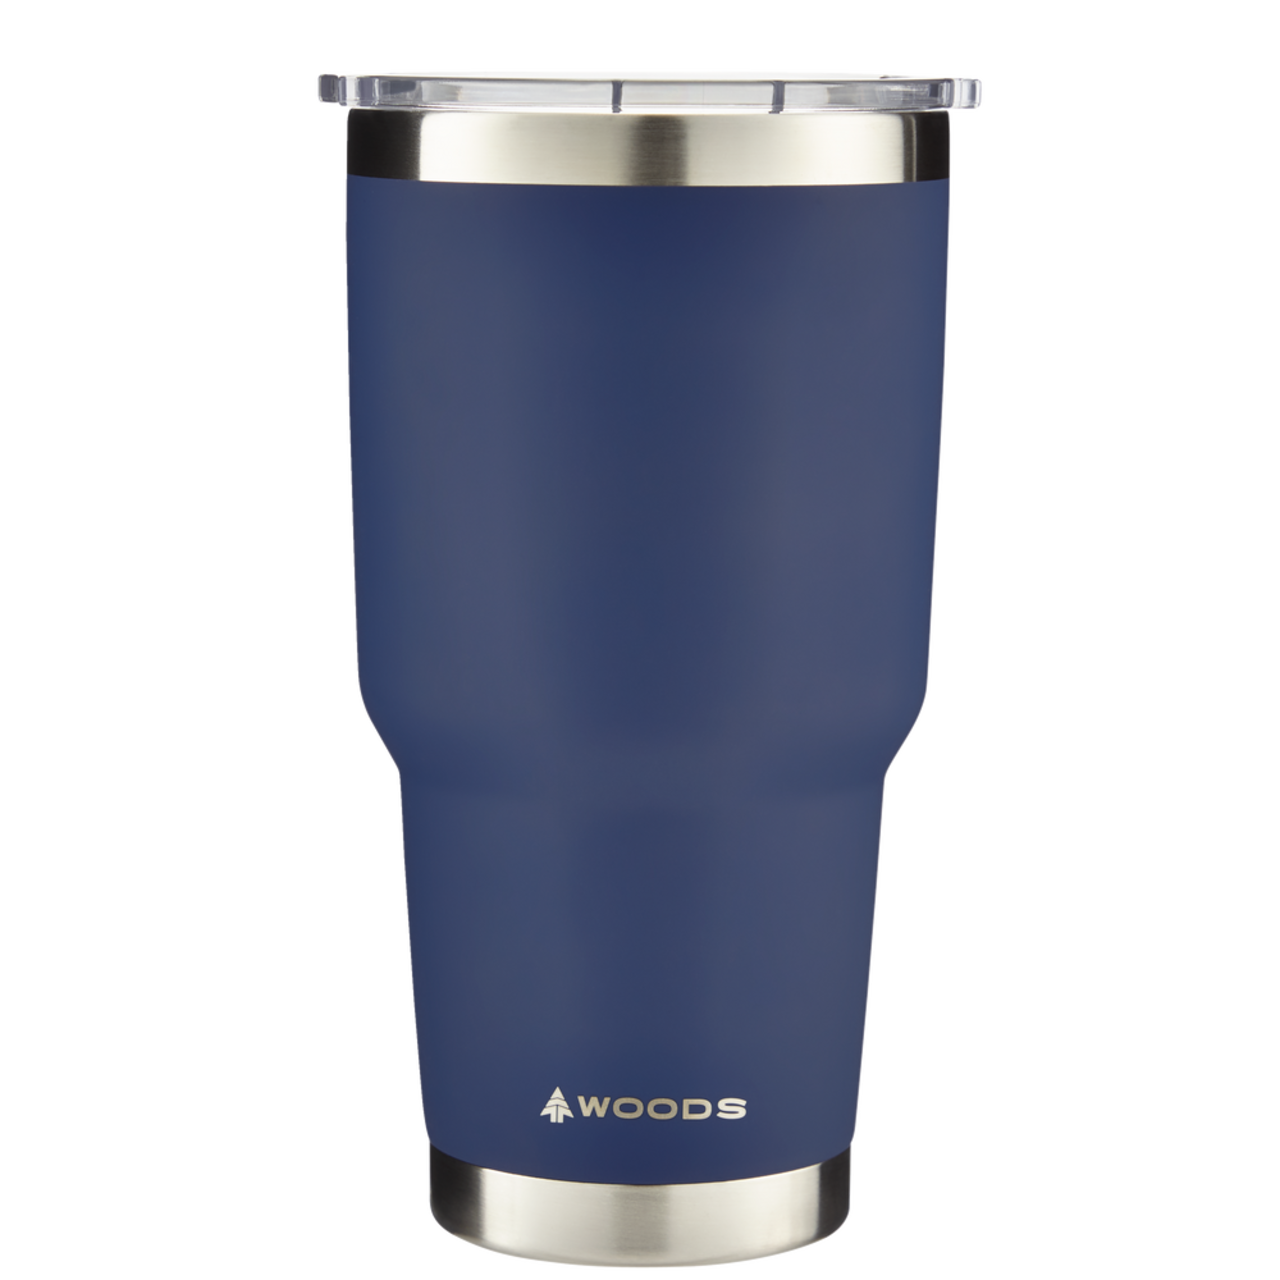 https://media-www.canadiantire.ca/product/playing/camping/camping-living/0766115/woods-tumbler-with-lid-890ml-e4453b6f-1f57-4c5a-b9ce-37c230aaeba5.png?imdensity=1&imwidth=640&impolicy=mZoom